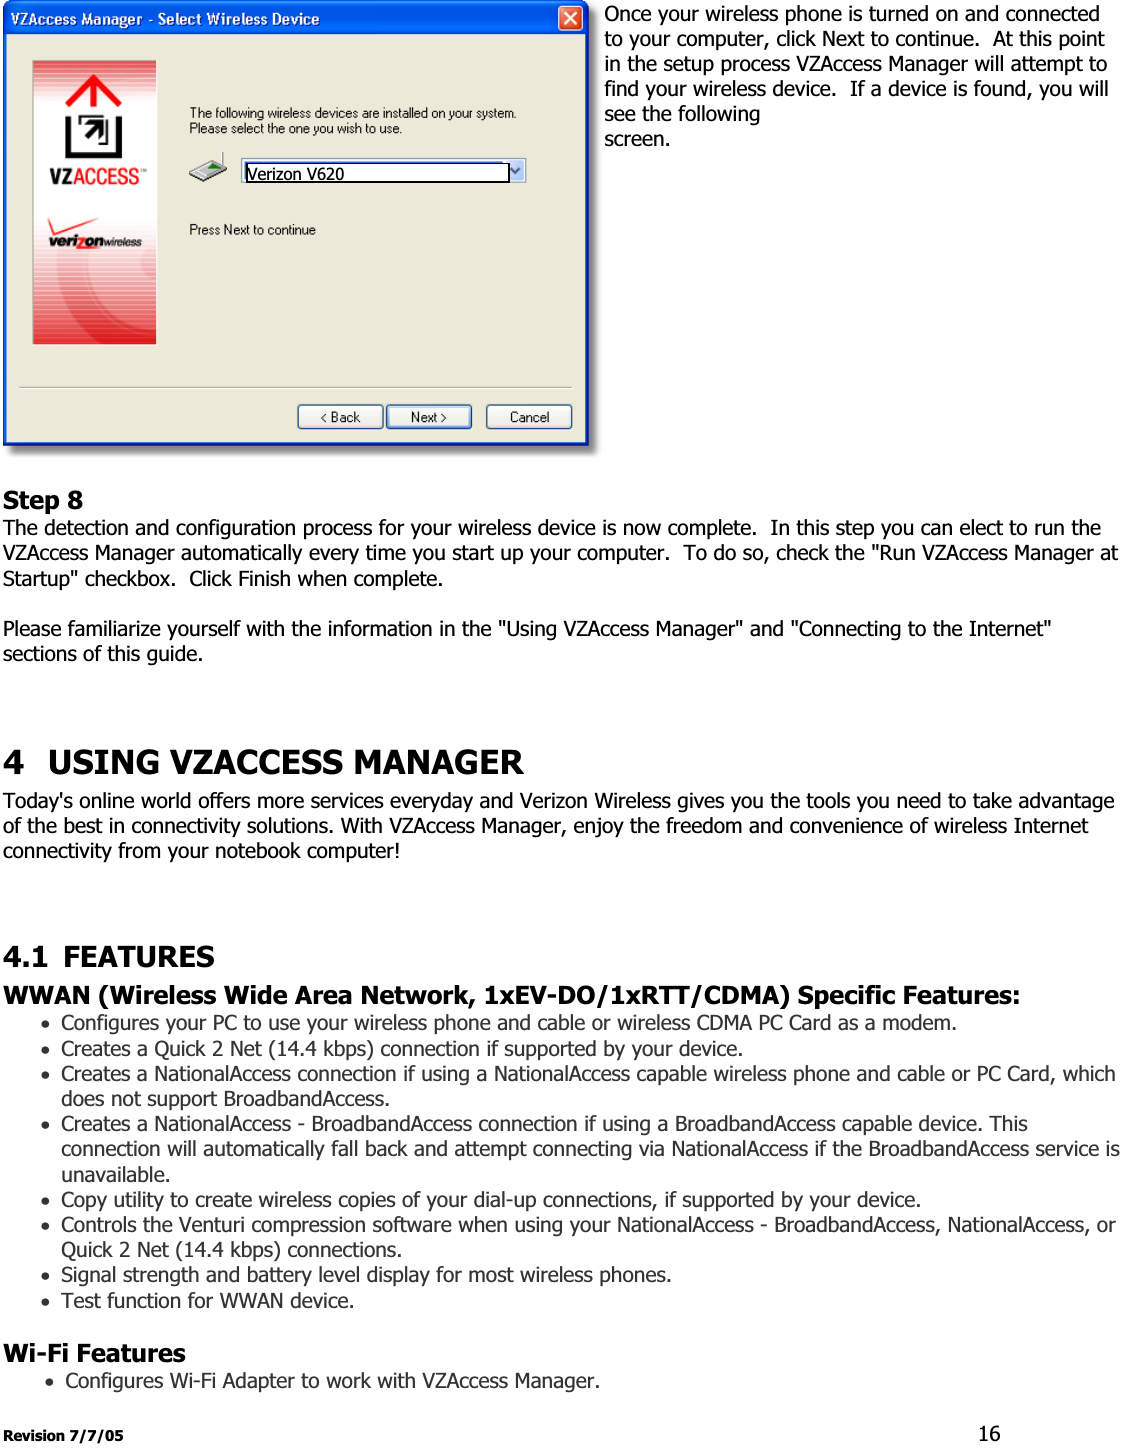 Revision 7/7/05  16Once your wireless phone is turned on and connected to your computer, click Next to continue.  At this point in the setup process VZAccess Manager will attempt to find your wireless device.  If a device is found, you will see the following screen.Step 8The detection and configuration process for your wireless device is now complete.  In this step you can elect to run the VZAccess Manager automatically every time you start up your computer.  To do so, check the &quot;Run VZAccess Manager at Startup&quot; checkbox.  Click Finish when complete. Please familiarize yourself with the information in the &quot;Using VZAccess Manager&quot; and &quot;Connecting to the Internet&quot; sections of this guide.   4 USING VZACCESS MANAGER Today&apos;s online world offers more services everyday and Verizon Wireless gives you the tools you need to take advantage of the best in connectivity solutions. With VZAccess Manager, enjoy the freedom and convenience of wireless Internet connectivity from your notebook computer! 4.1 FEATURES WWAN (Wireless Wide Area Network, 1xEV-DO/1xRTT/CDMA) Specific Features:xConfigures your PC to use your wireless phone and cable or wireless CDMA PC Card as a modem. xCreates a Quick 2 Net (14.4 kbps) connection if supported by your device. xCreates a NationalAccess connection if using a NationalAccess capable wireless phone and cable or PC Card, which does not support BroadbandAccess. xCreates a NationalAccess - BroadbandAccess connection if using a BroadbandAccess capable device. This connection will automatically fall back and attempt connecting via NationalAccess if the BroadbandAccess service is unavailable. xCopy utility to create wireless copies of your dial-up connections, if supported by your device. xControls the Venturi compression software when using your NationalAccess - BroadbandAccess, NationalAccess, or Quick 2 Net (14.4 kbps) connections. xSignal strength and battery level display for most wireless phones. xTest function for WWAN device.  Wi-Fi FeaturesxConfigures Wi-Fi Adapter to work with VZAccess Manager. Verizon V620 